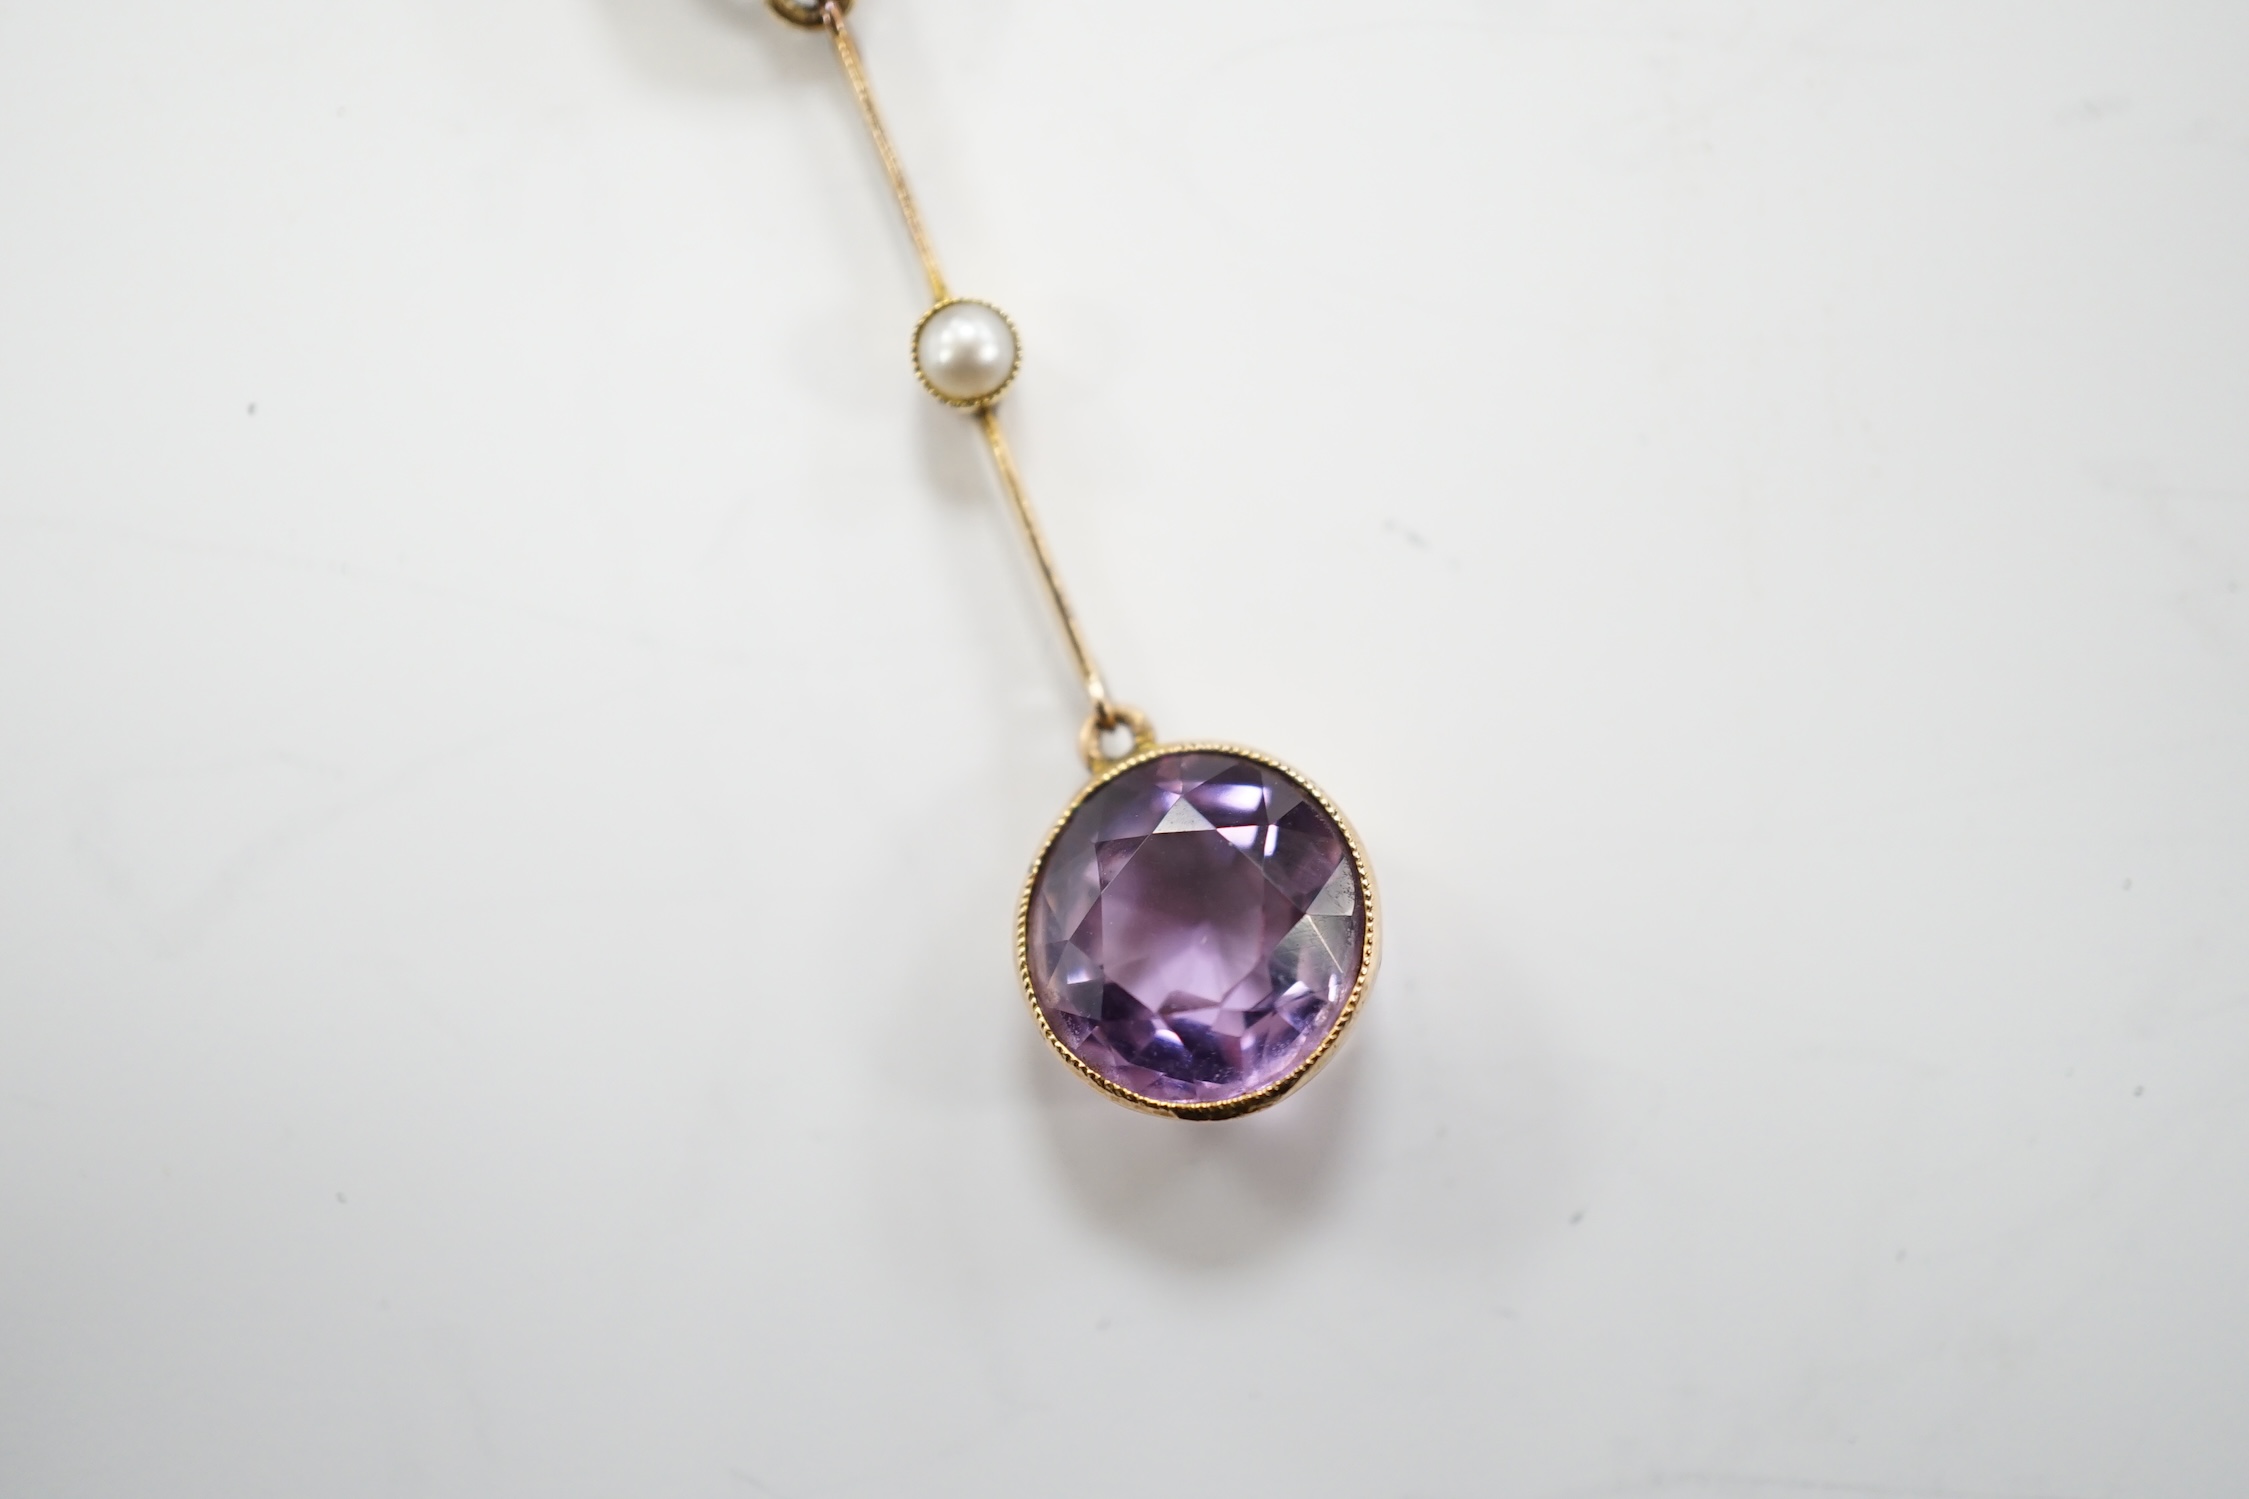 An Edwardian 9ct, two stone amethyst and single stone seed pearl set drop pendant necklace, gross weight 3.8 grams.